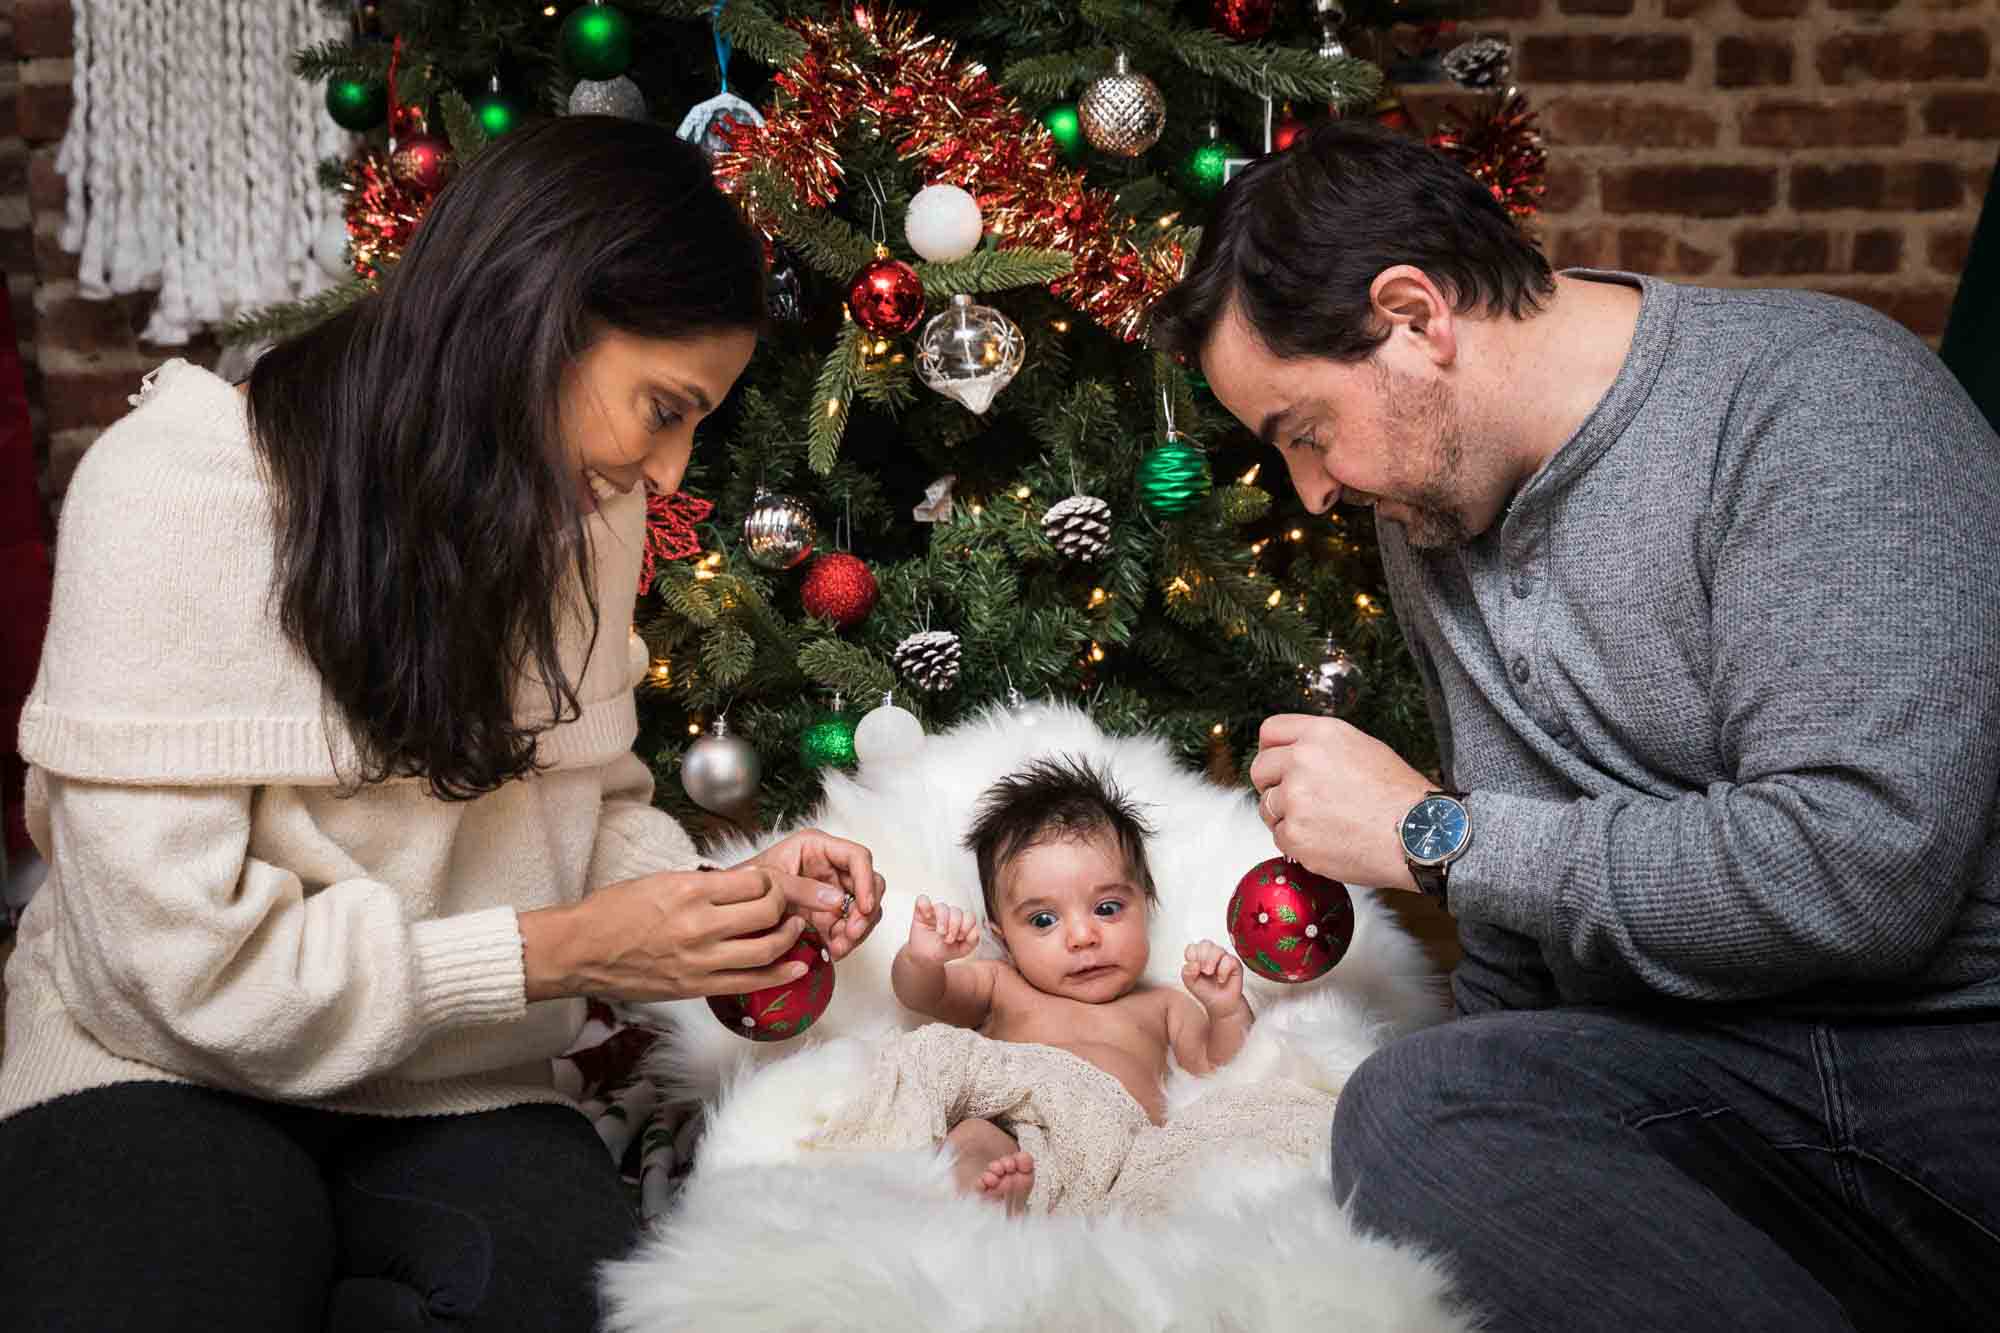 Parents holding Christmas ornaments in front of newborn baby during a Christmas-themed newborn photo shoot in NYC